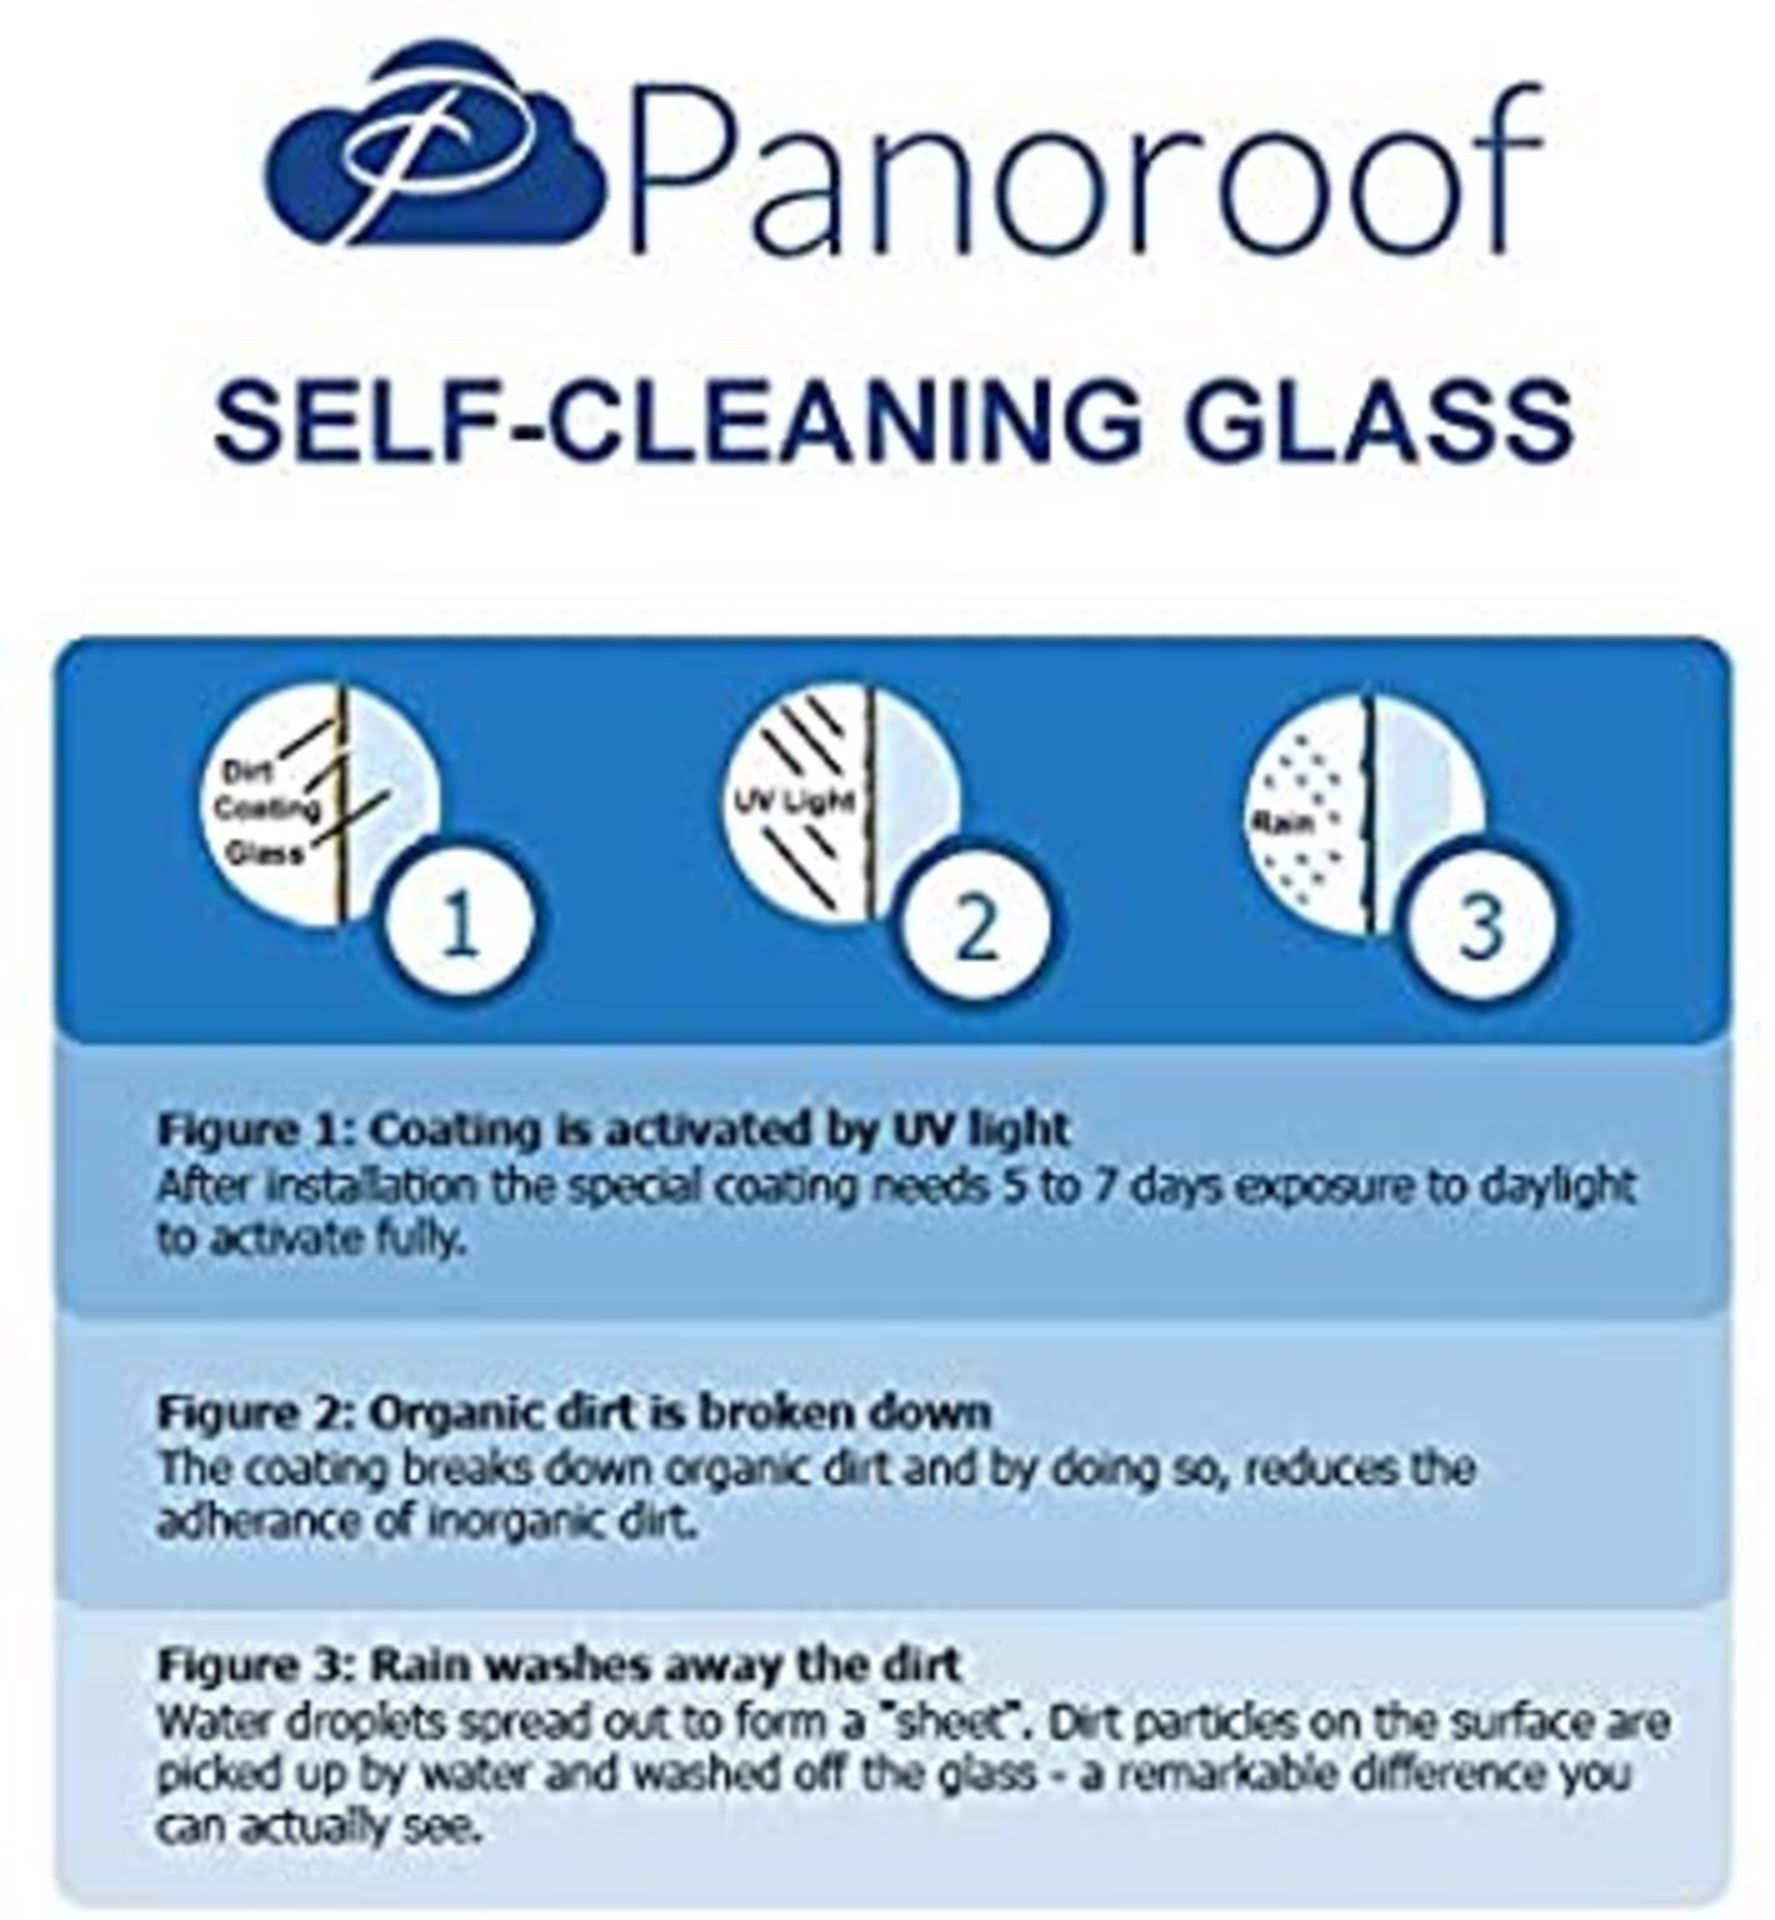 """Panoroof Triple Glazed Self Cleaning 600x1500mm (inside Size Visable glass area) Seamless Glass - Image 6 of 6